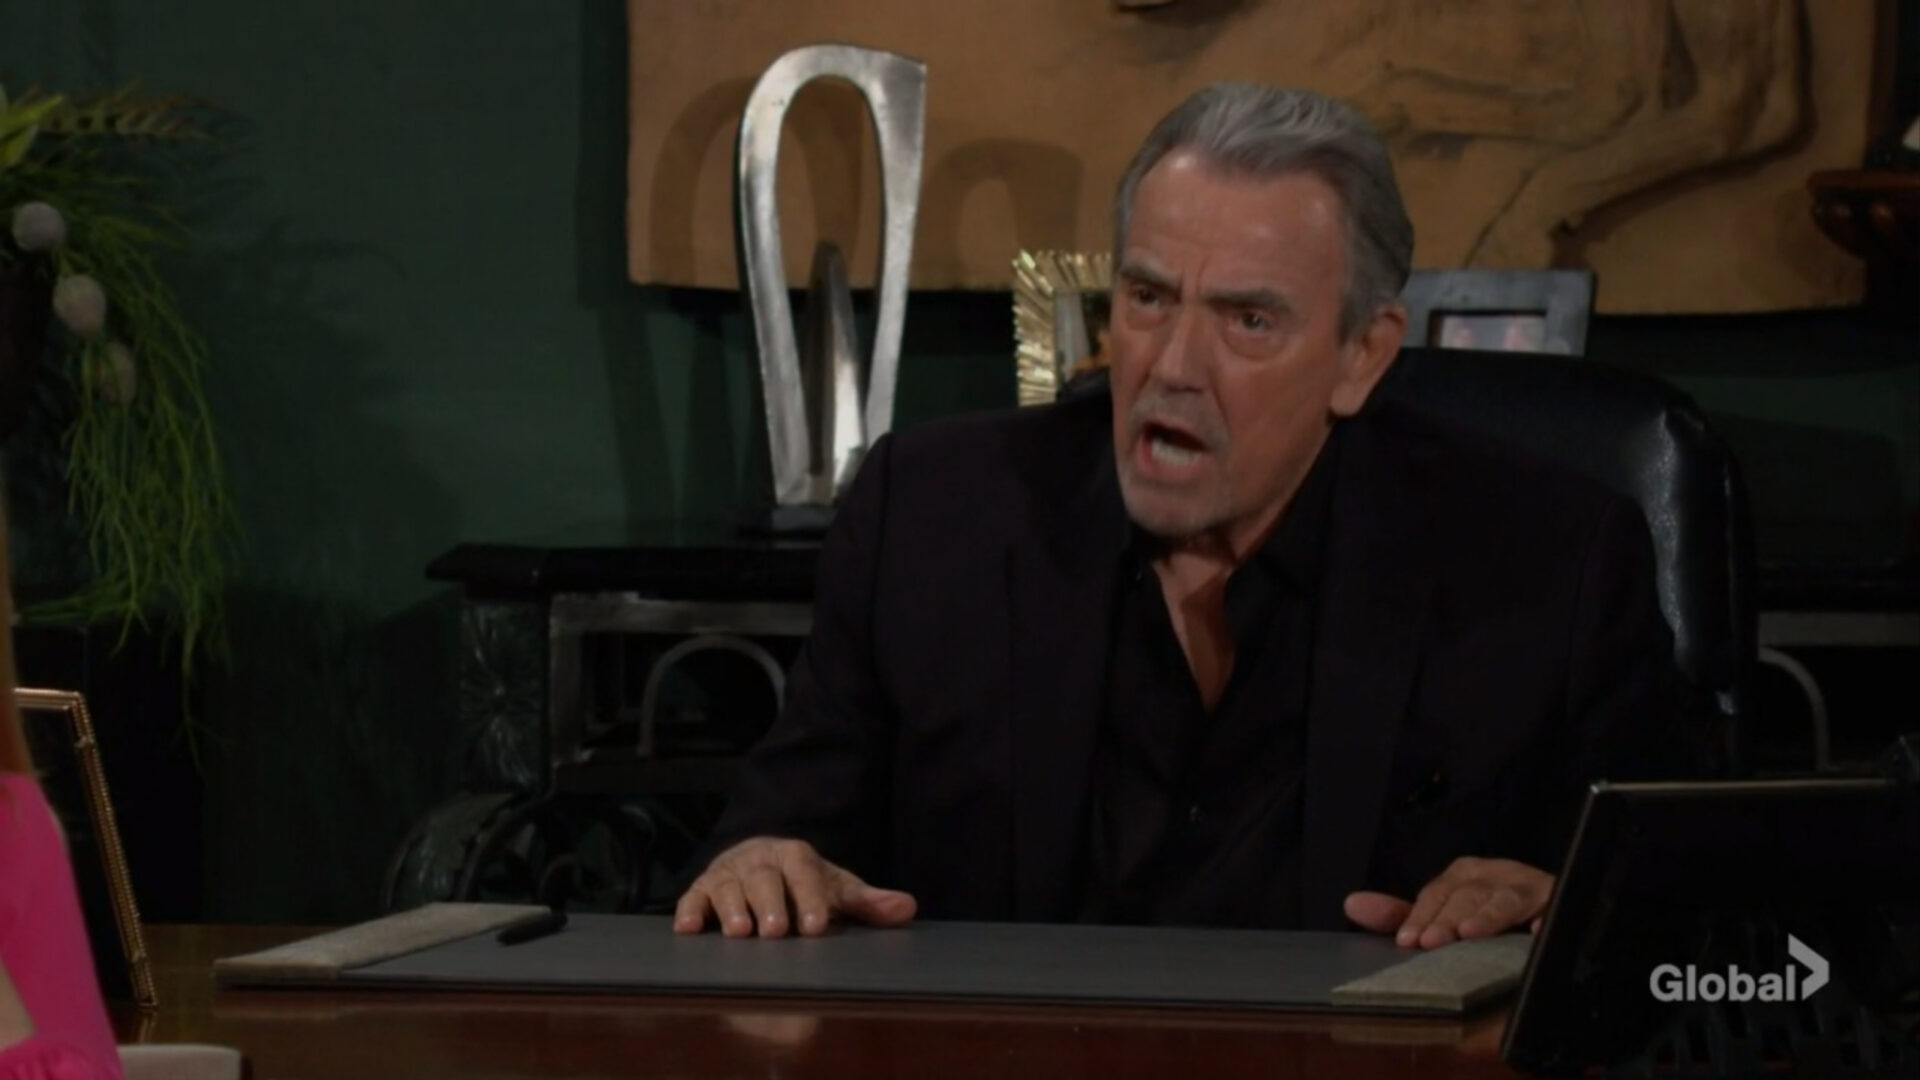 victor screetches at daughter young and restless cbs soapsspoilers